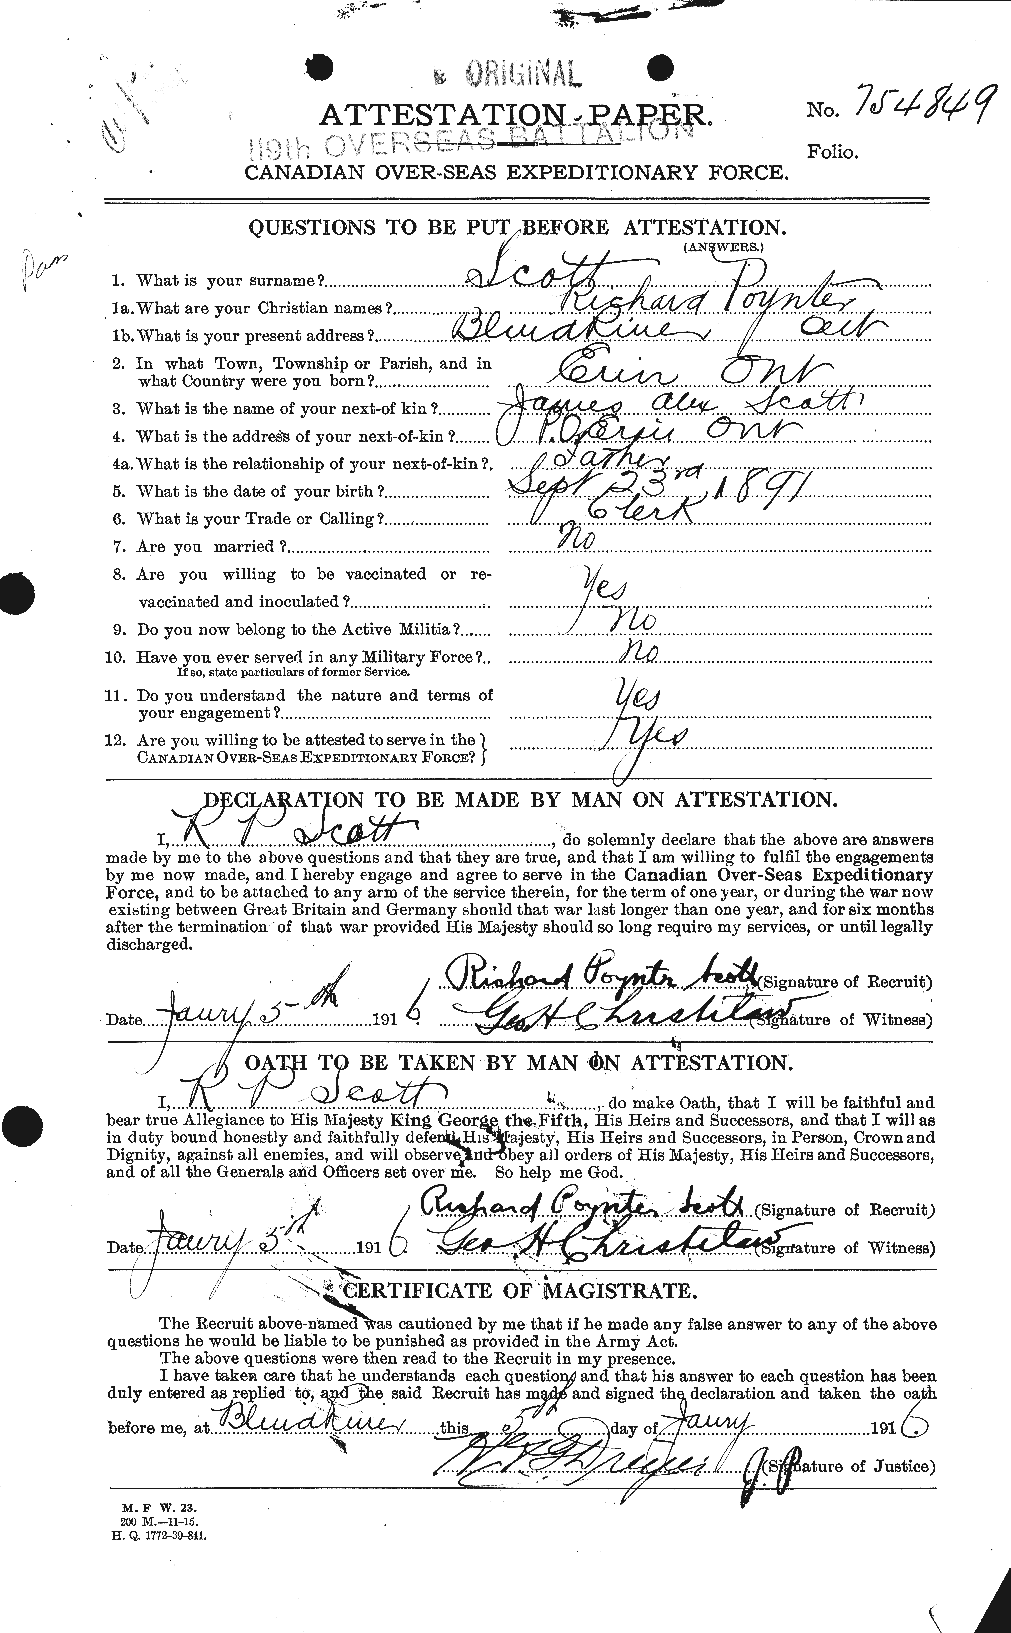 Personnel Records of the First World War - CEF 089256a